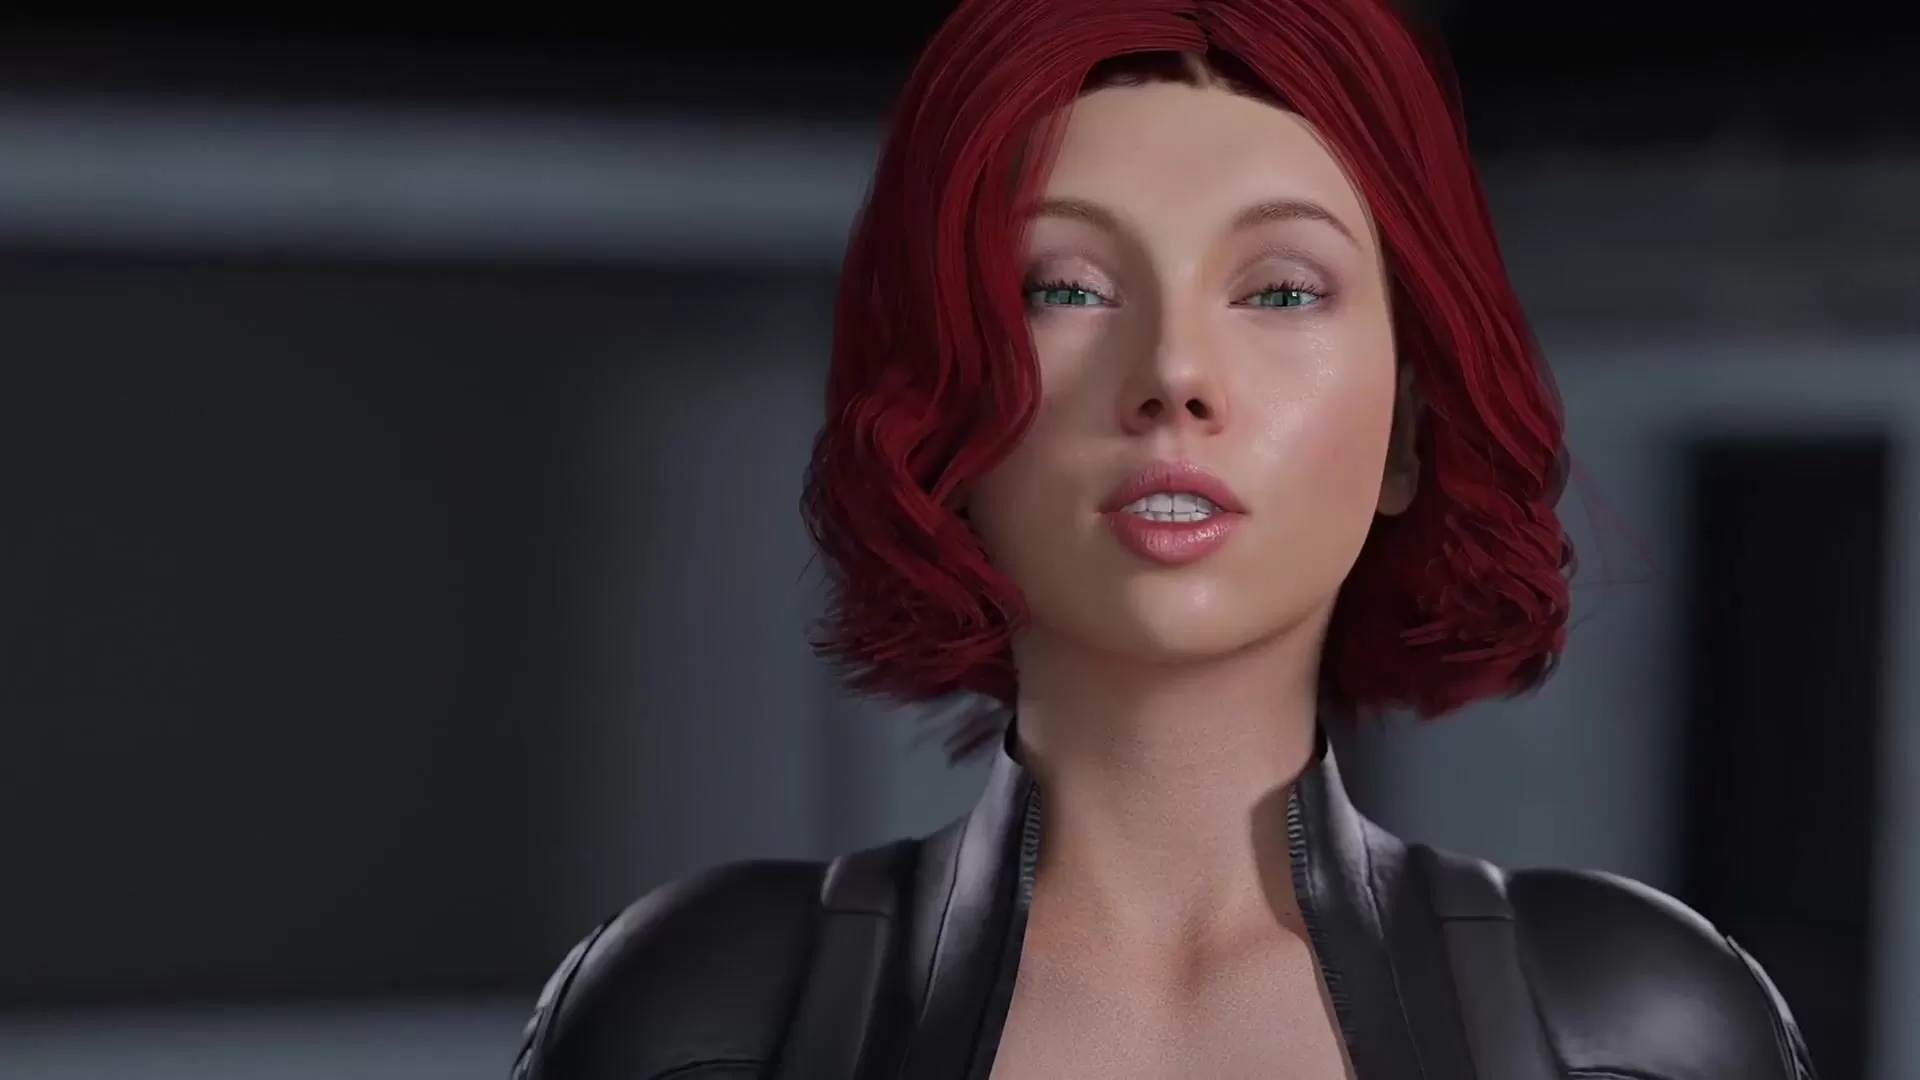 Ultron And Black Widow Sex - Marvel - Black Widow's Recruitment Requirements (Animation with Sound)  watch online